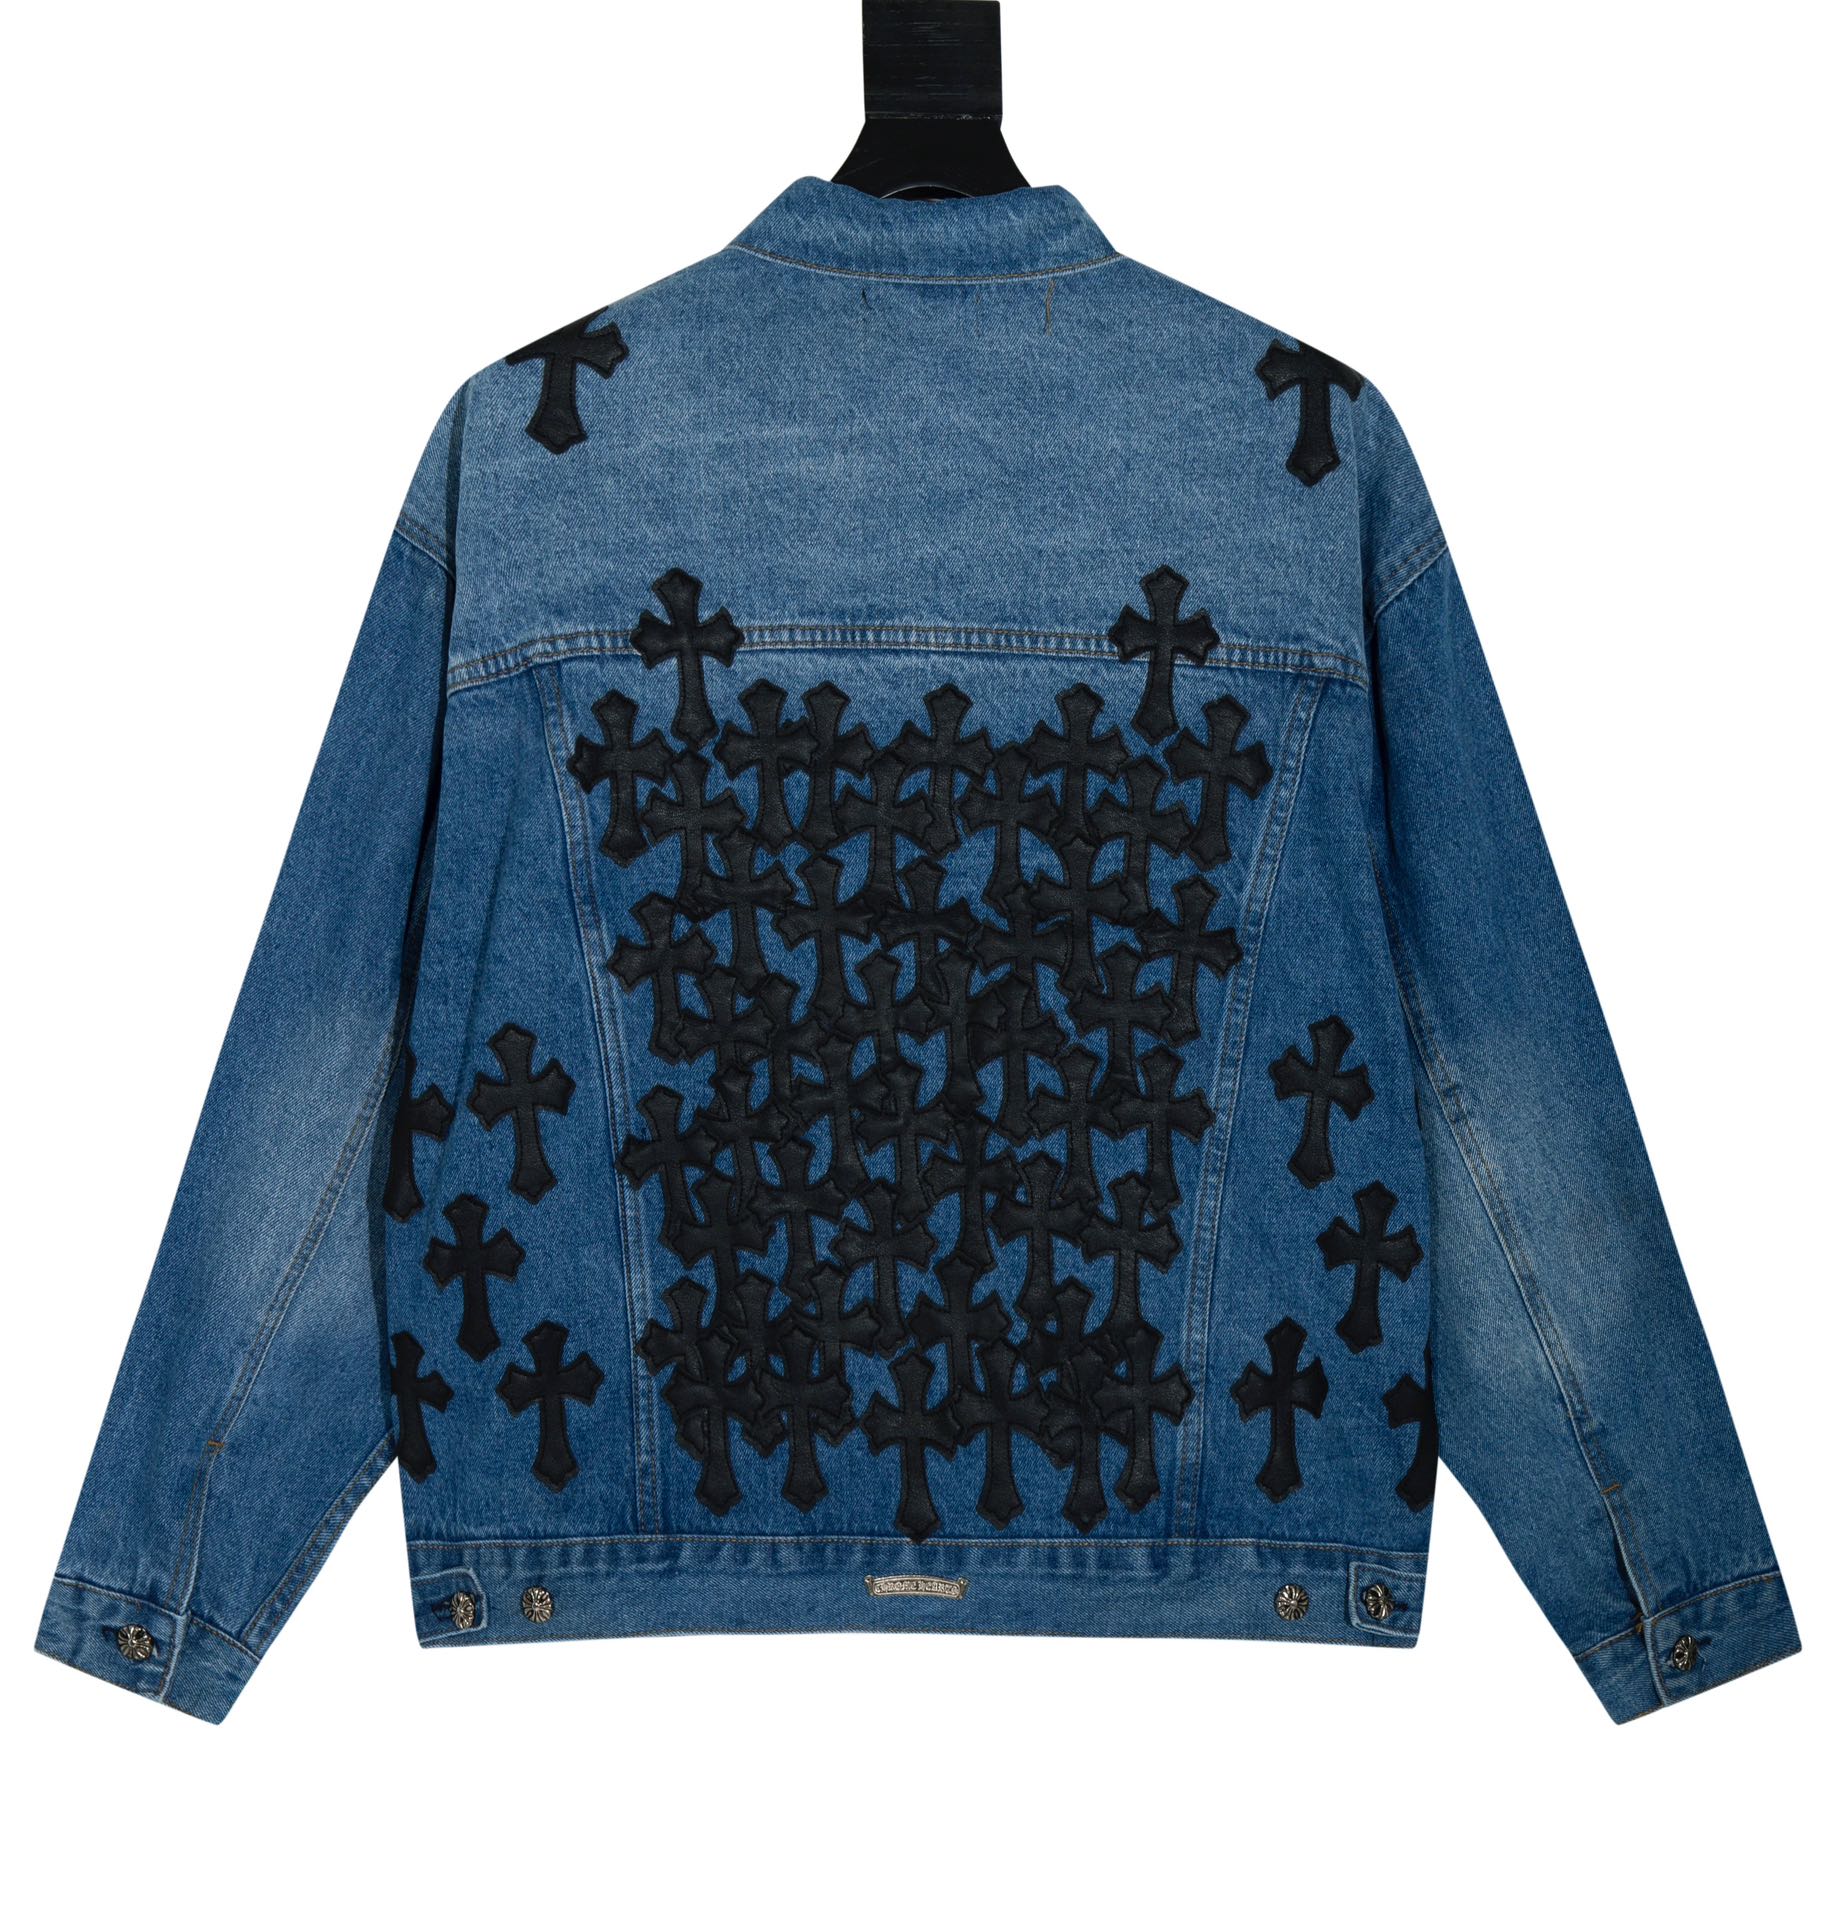 Chrome Hearts Clothing Coats & Jackets Blue Dark Pink Sewing Unisex Men Spring Collection